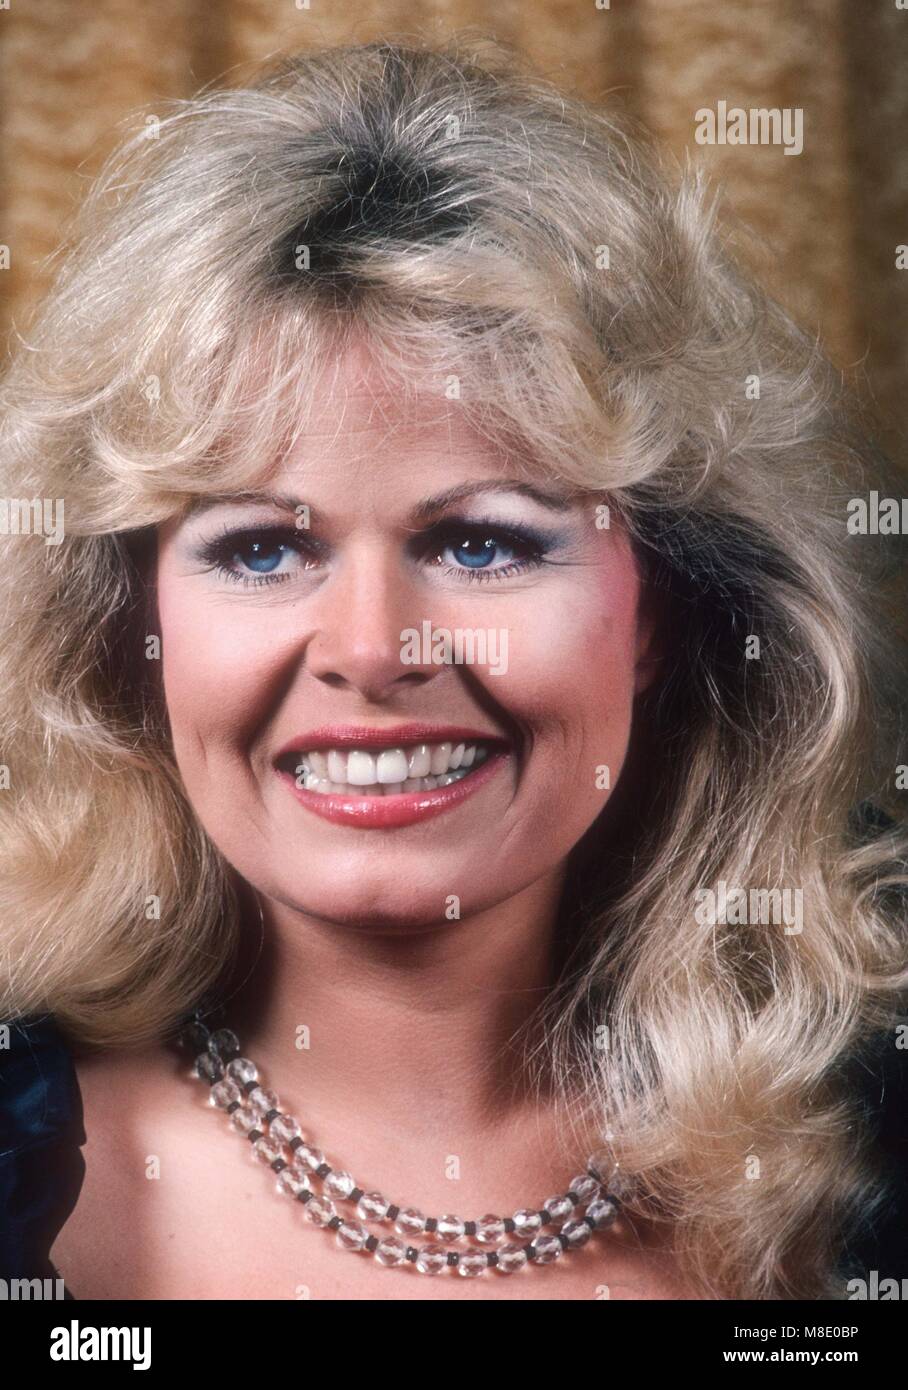 Struthers pictures sally Sally Struthers